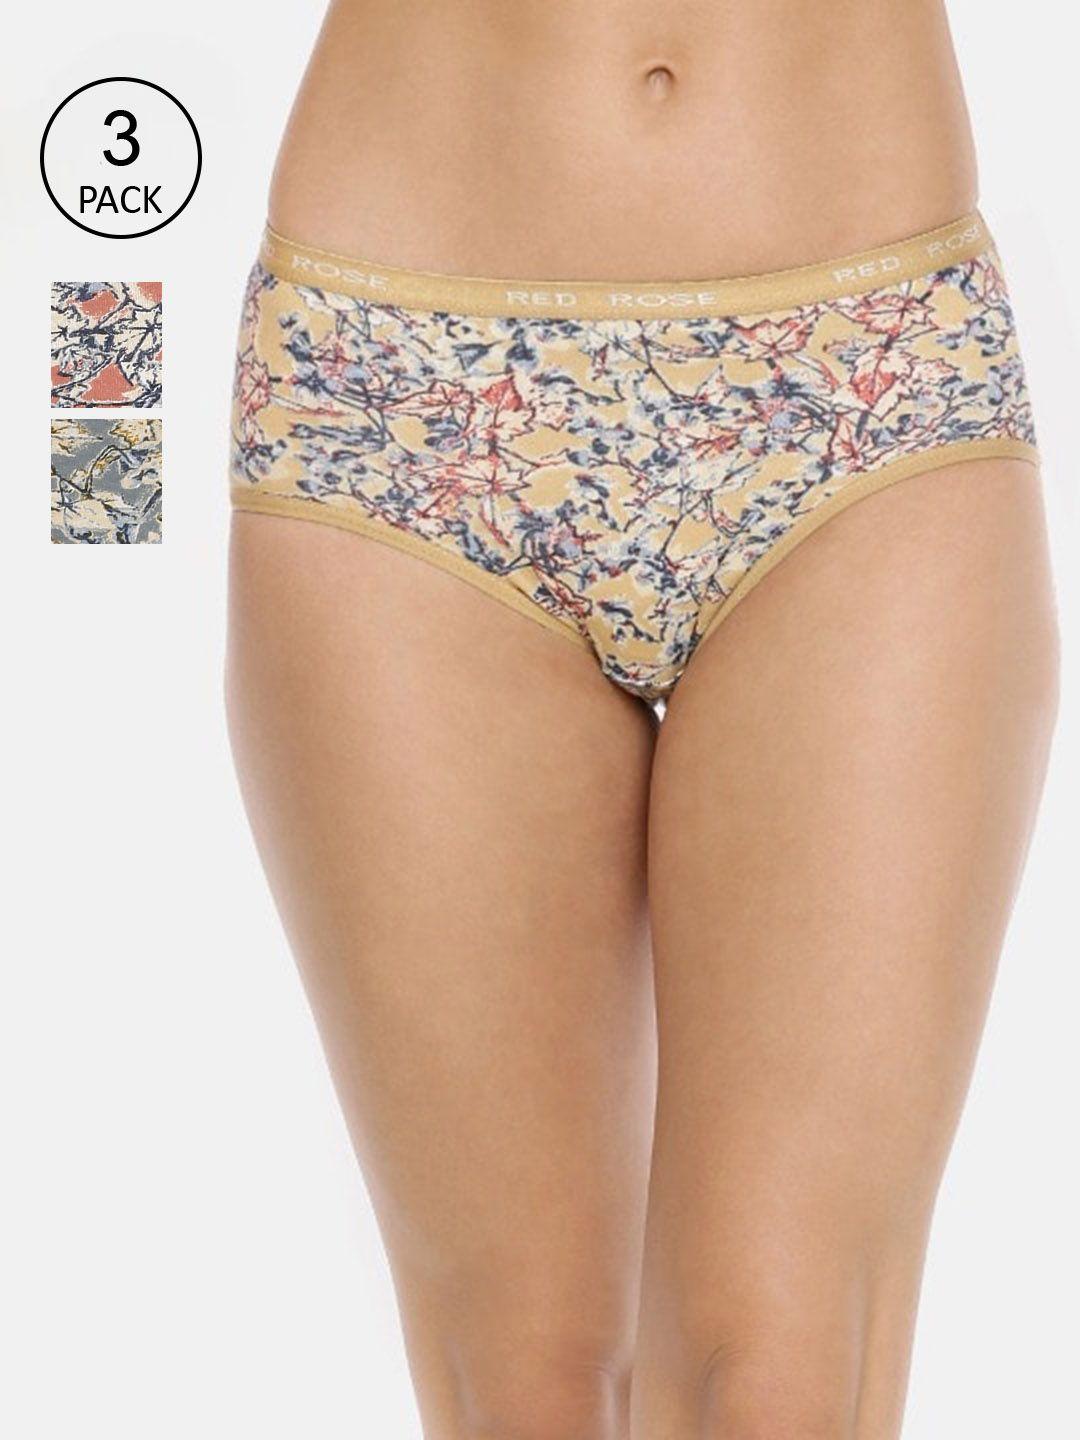 redrose women pack of 3 printed hipster briefs